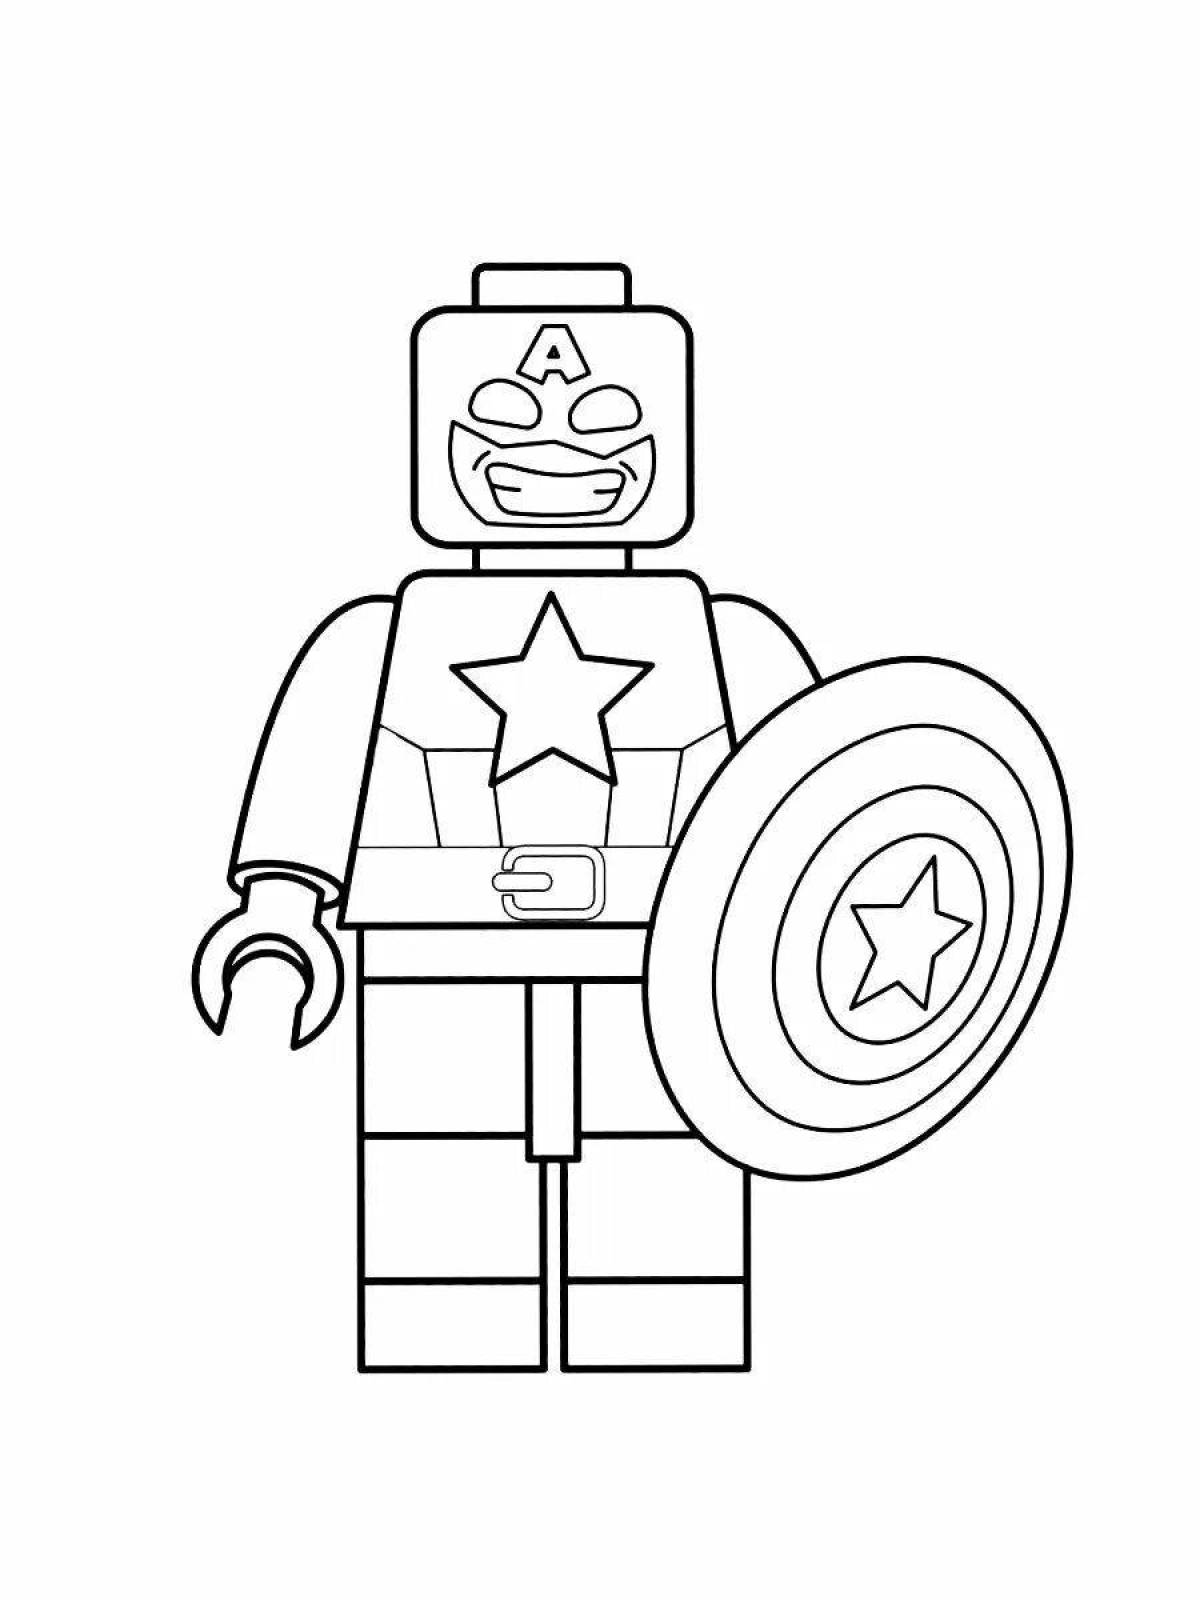 Great coloring lego captain america